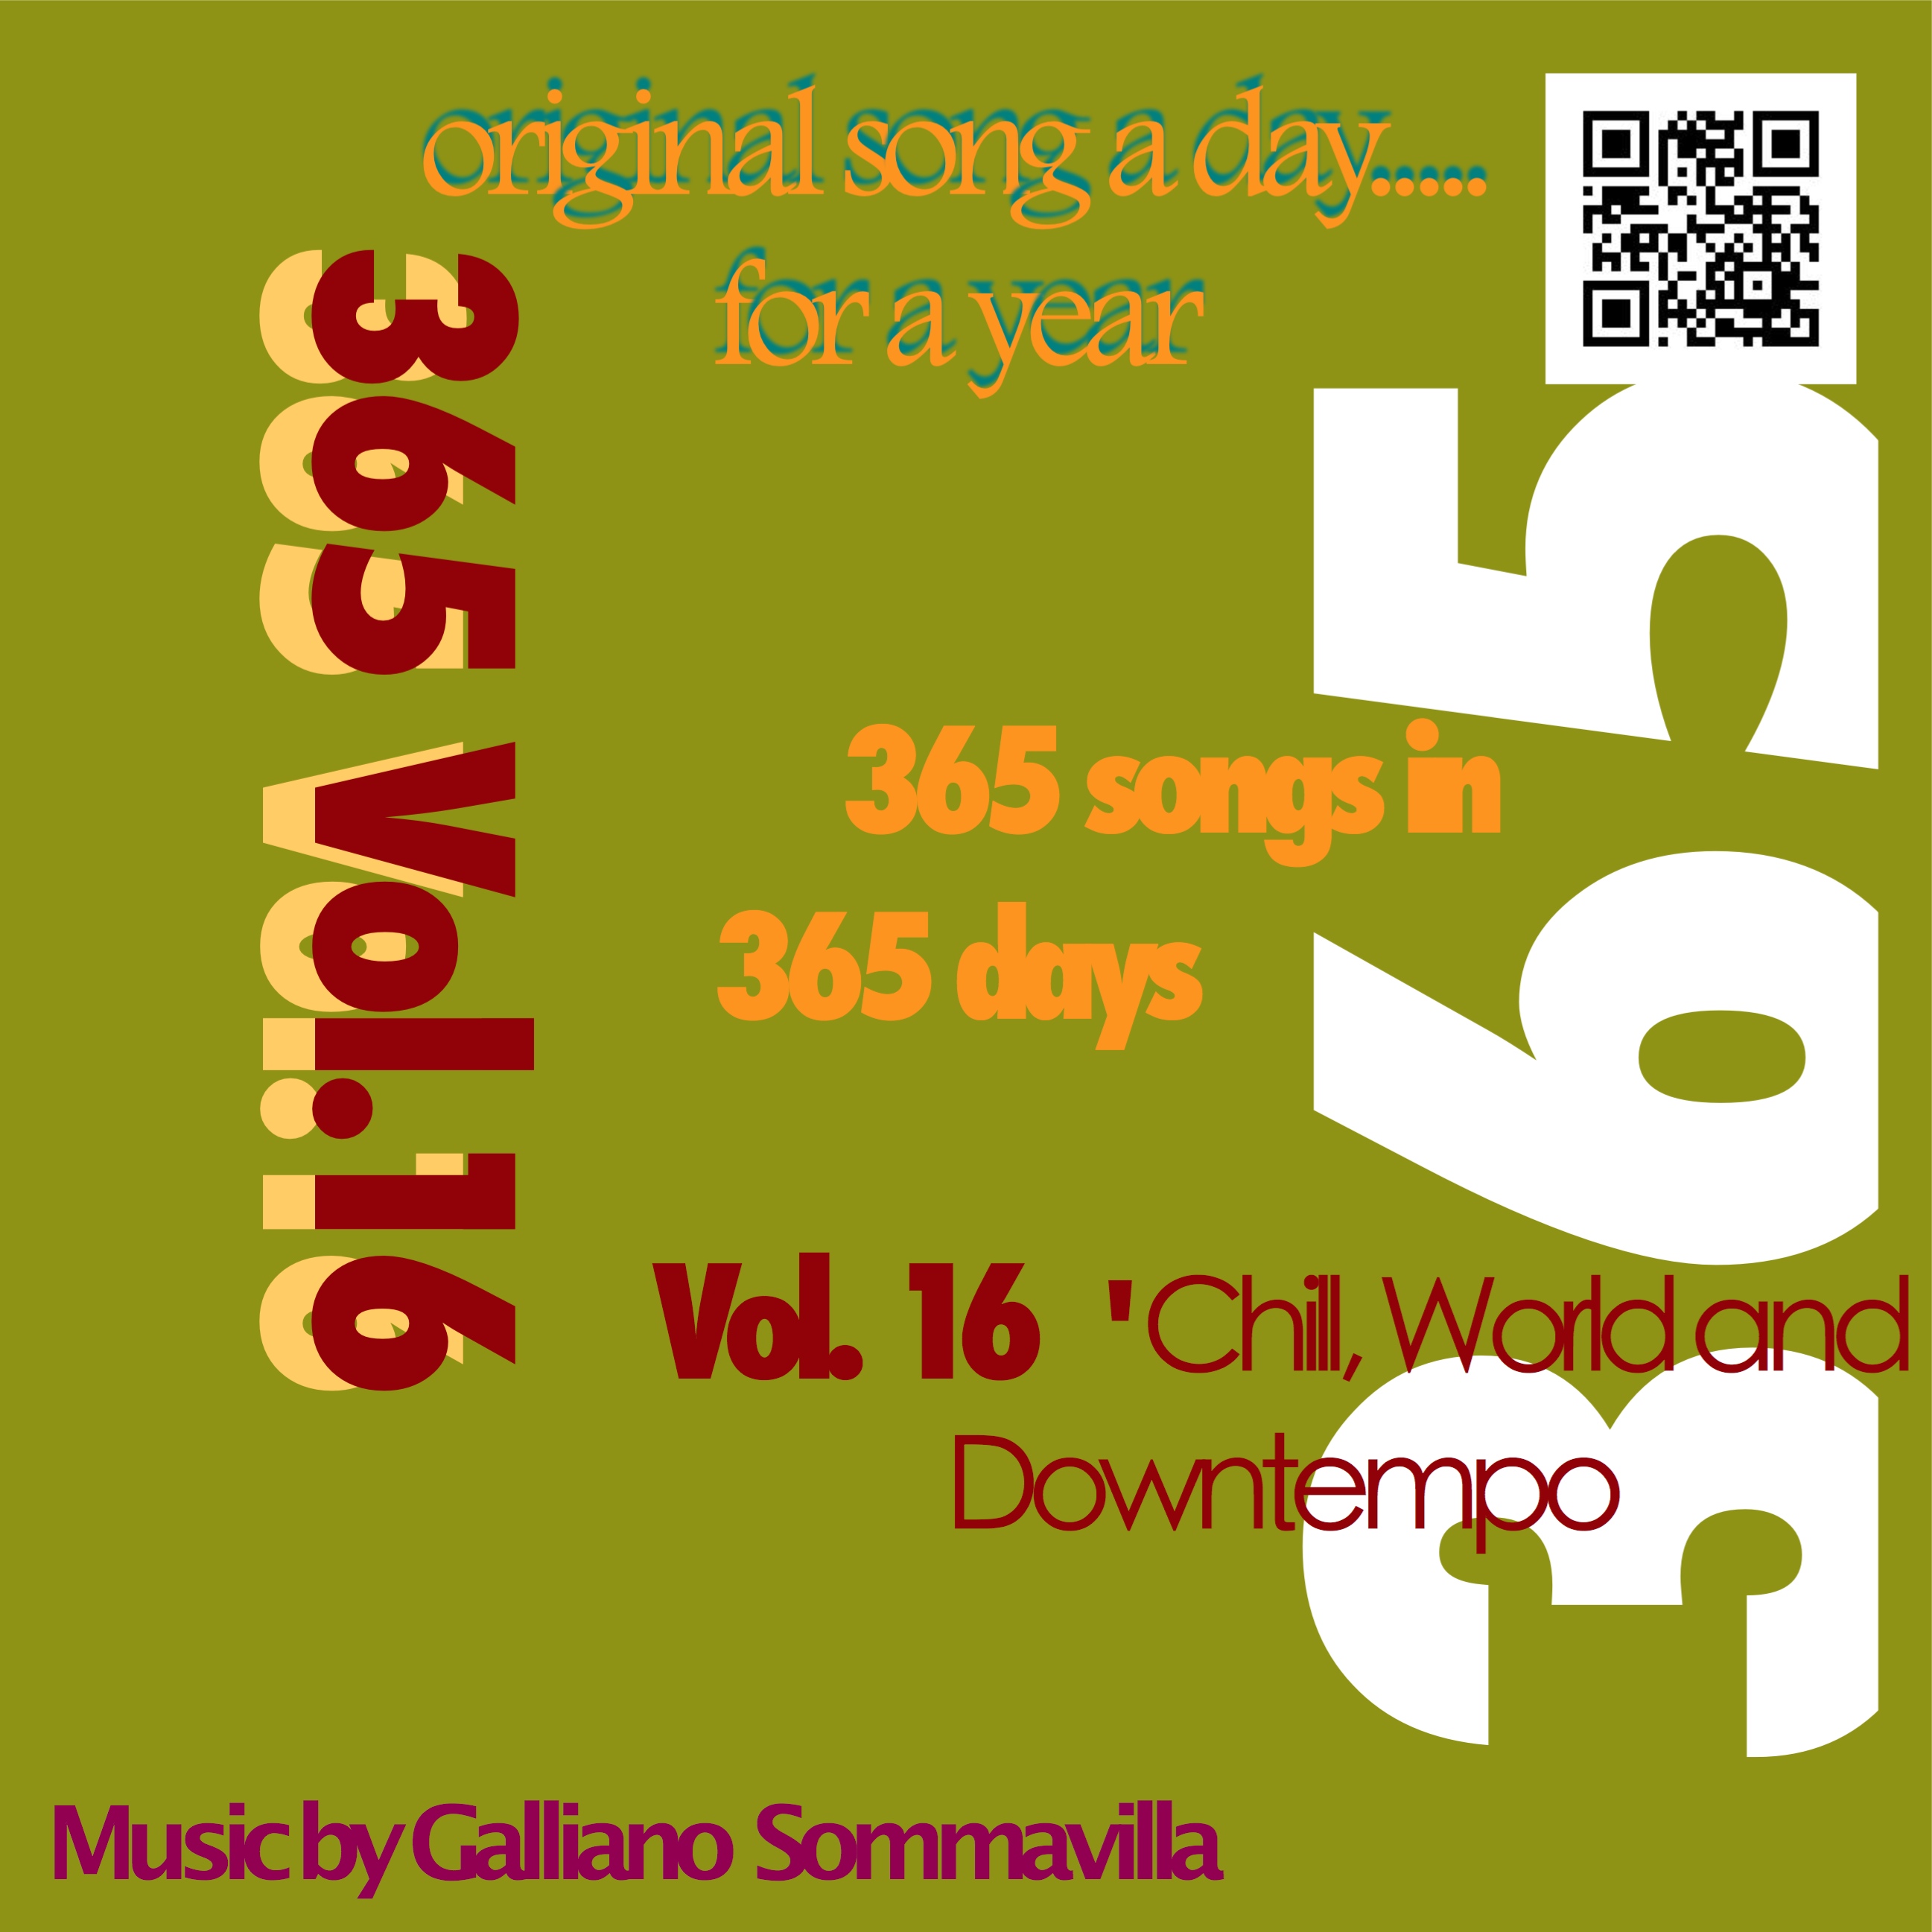 original song a day for a year - Series '365'